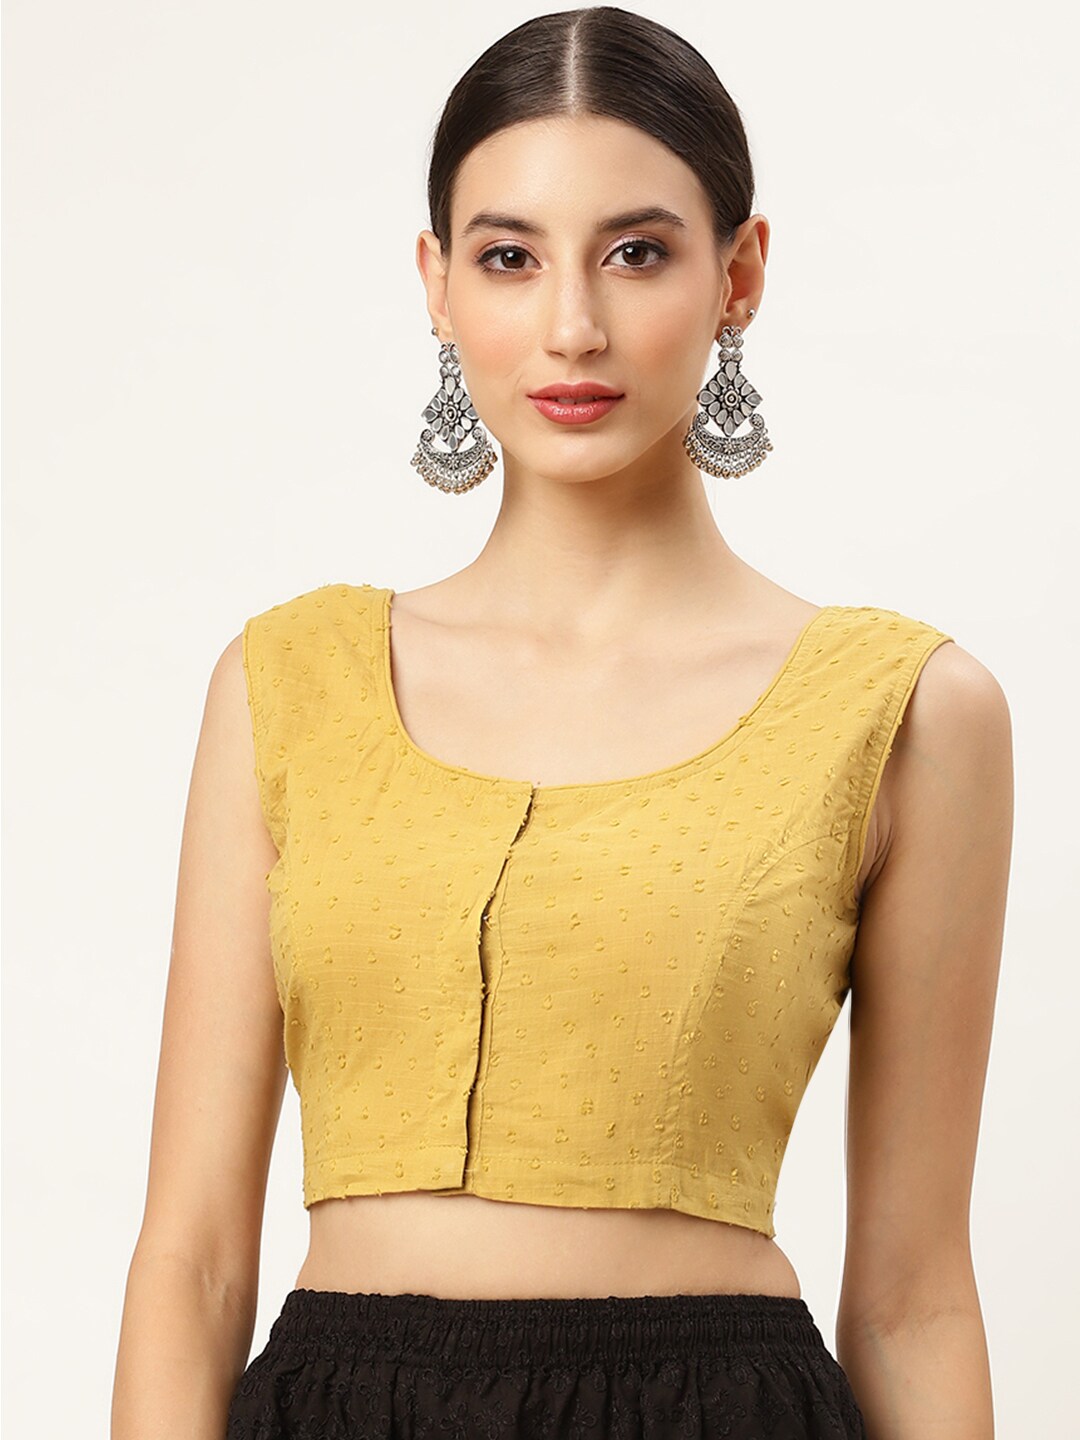 Molcha Women Mustard Yellow Cotton Saree Blouse with Dobby Weave Price in India